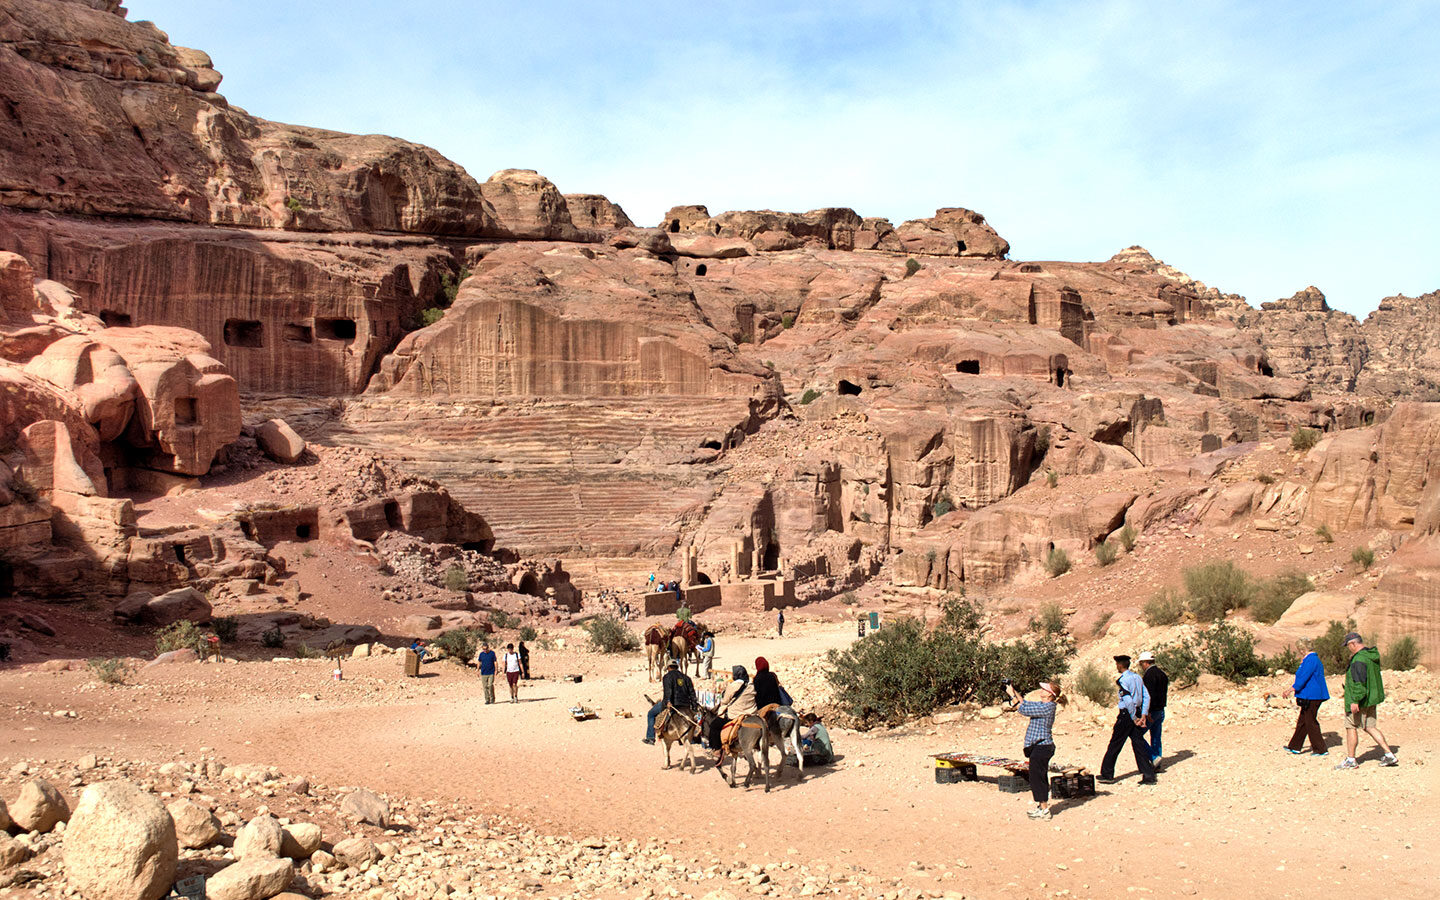 The theatre when spending one day in Petra